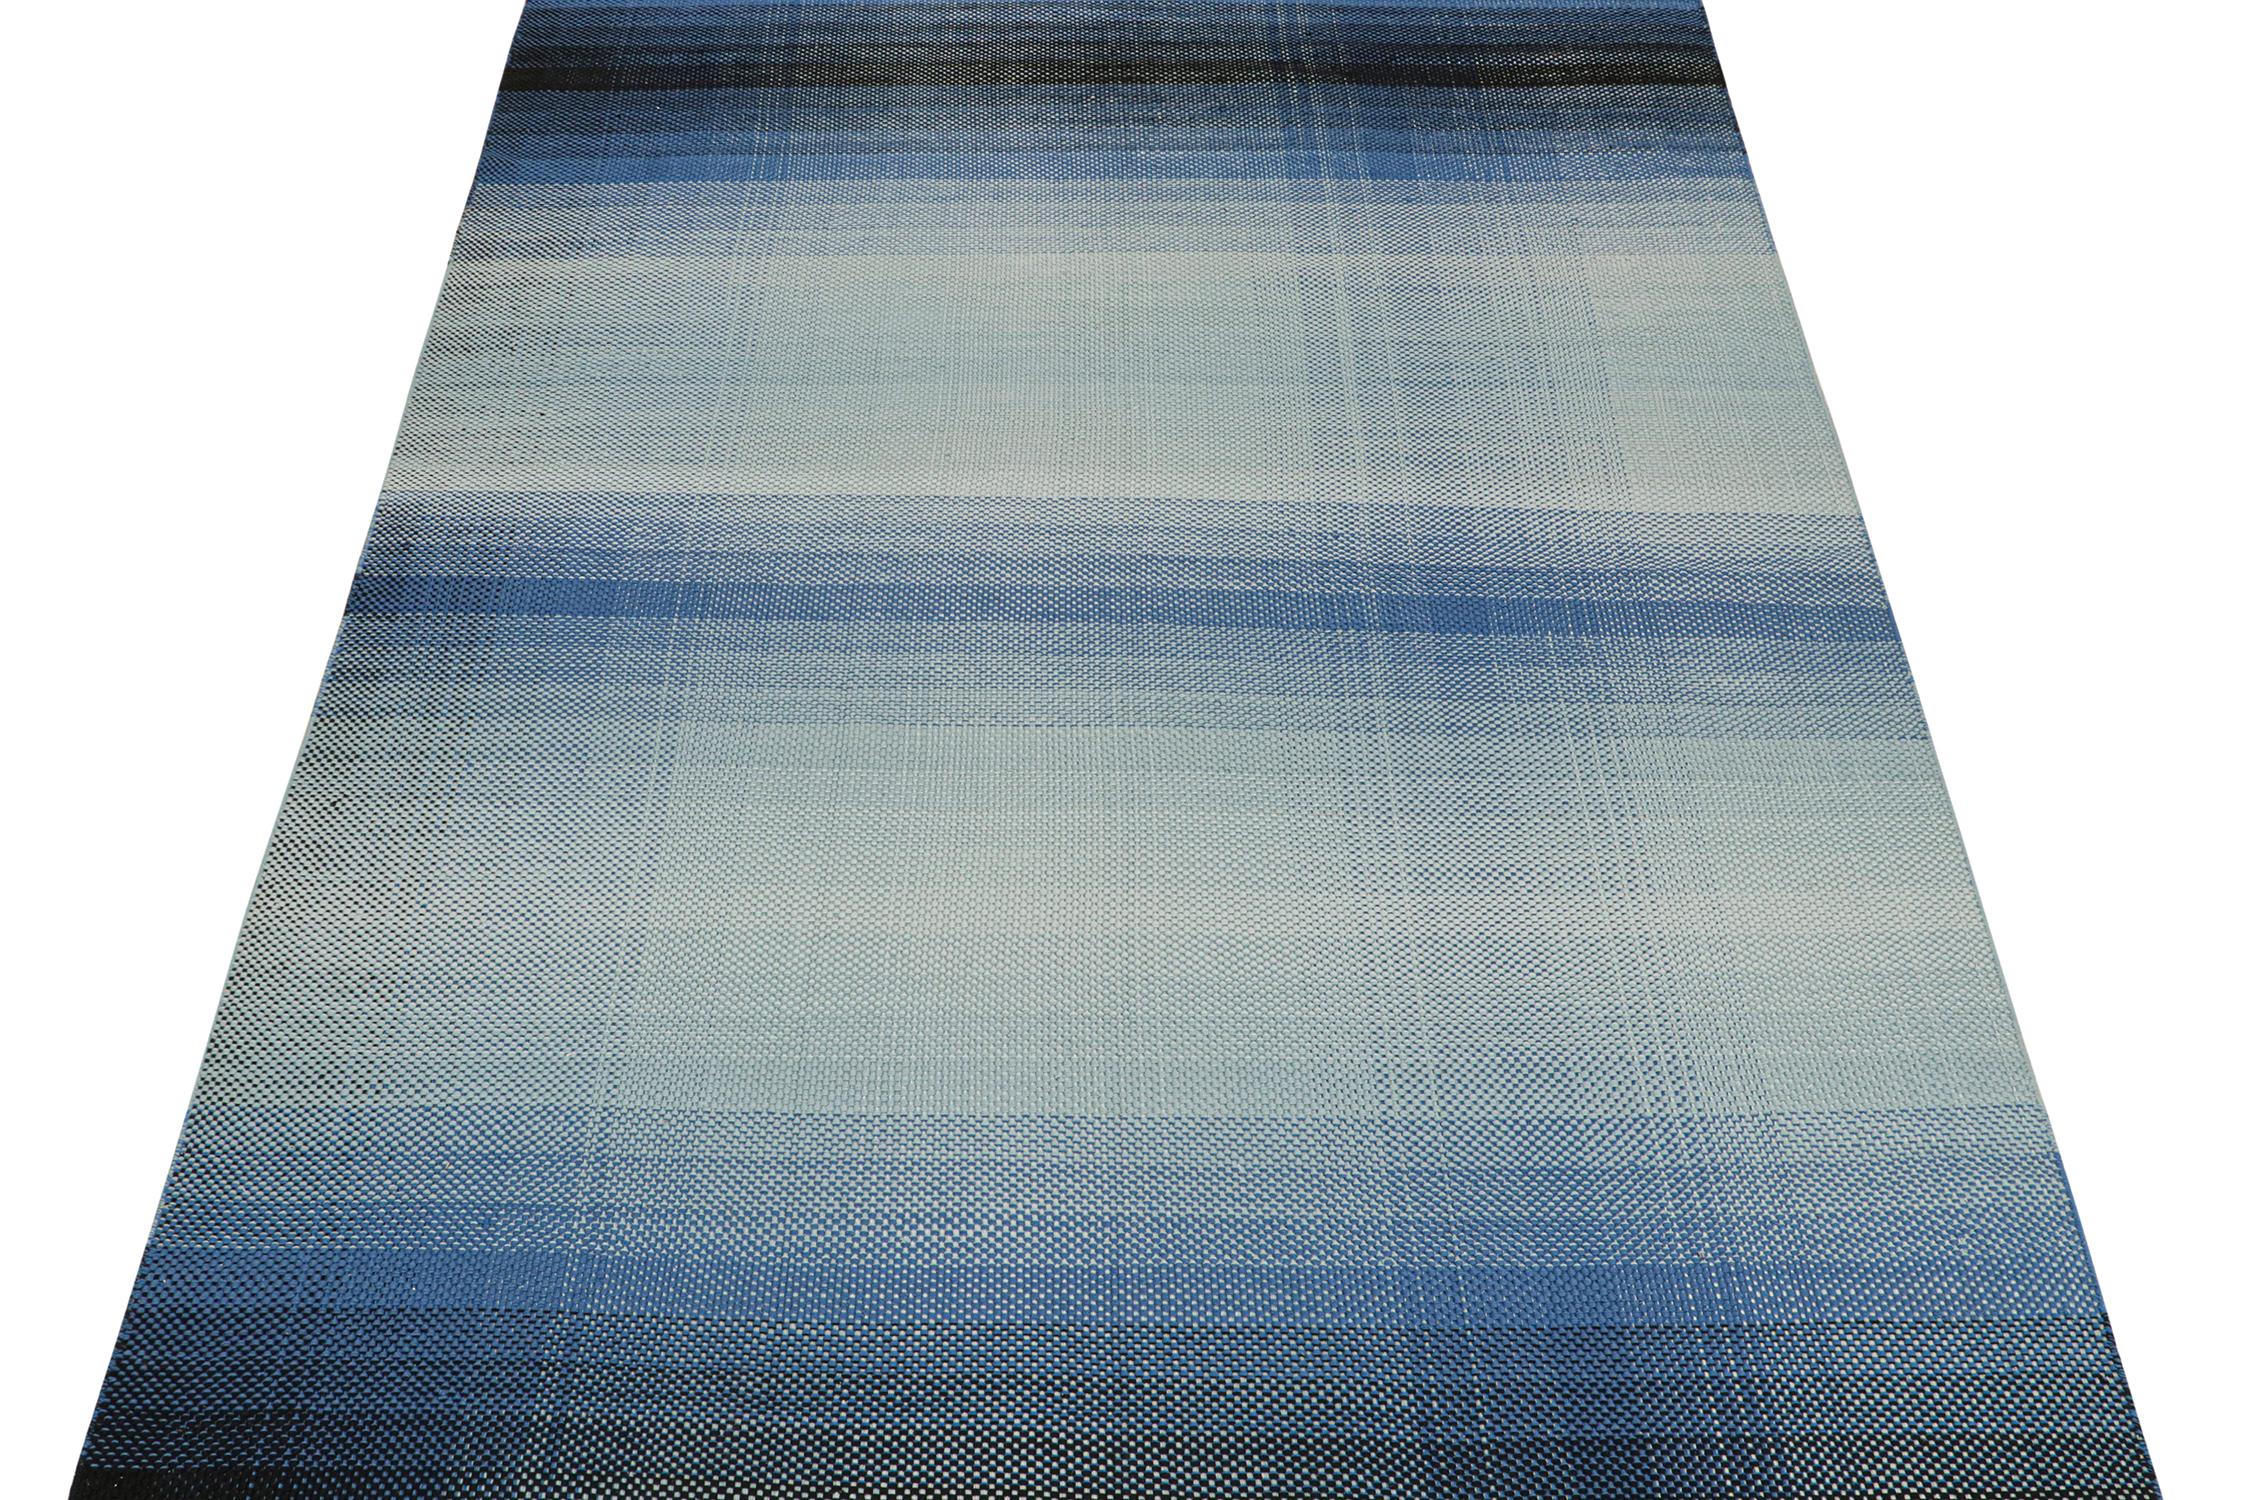 This 9x12 flat weave is an exciting new addition to the “Smartloom” texture in Rug & Kilim’s Scandinavian Collection. 

On the Design: 

Handwoven in a durable semi-vested wool, this new flat weave technique enjoys a unique texture and bold ombre